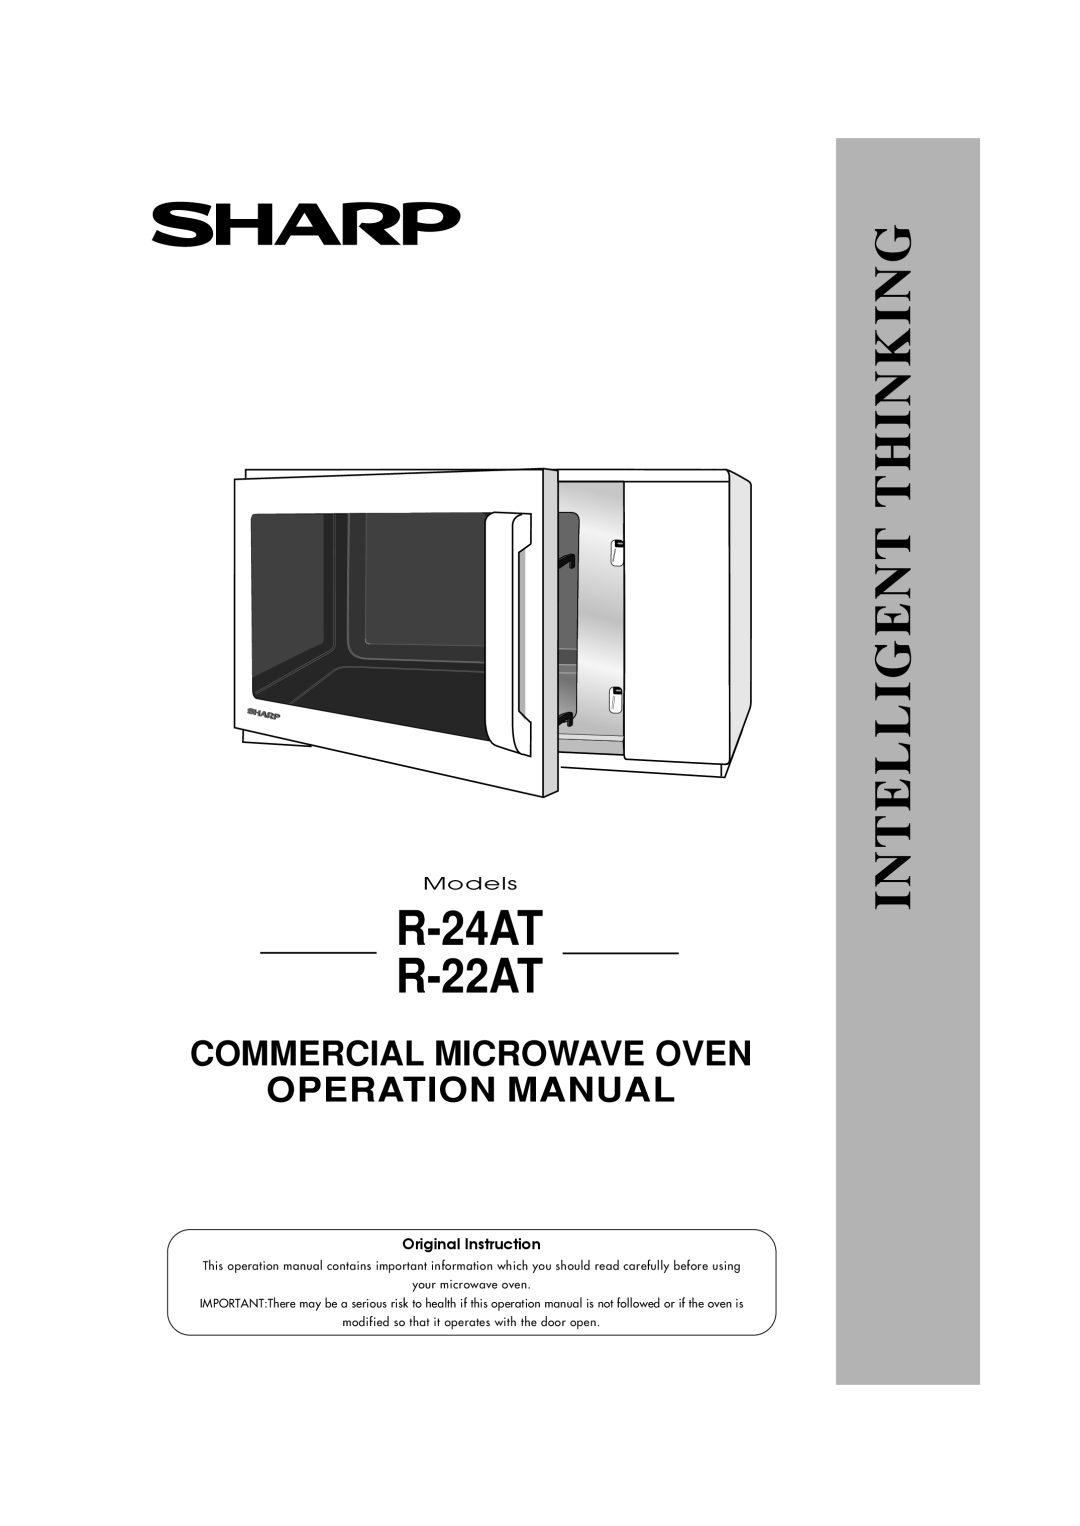 Sharp service manual Sharp Corporation, Commercial Microwave Oven, MODELS R-22AT, Table Of Contents, SY520R24ATK 